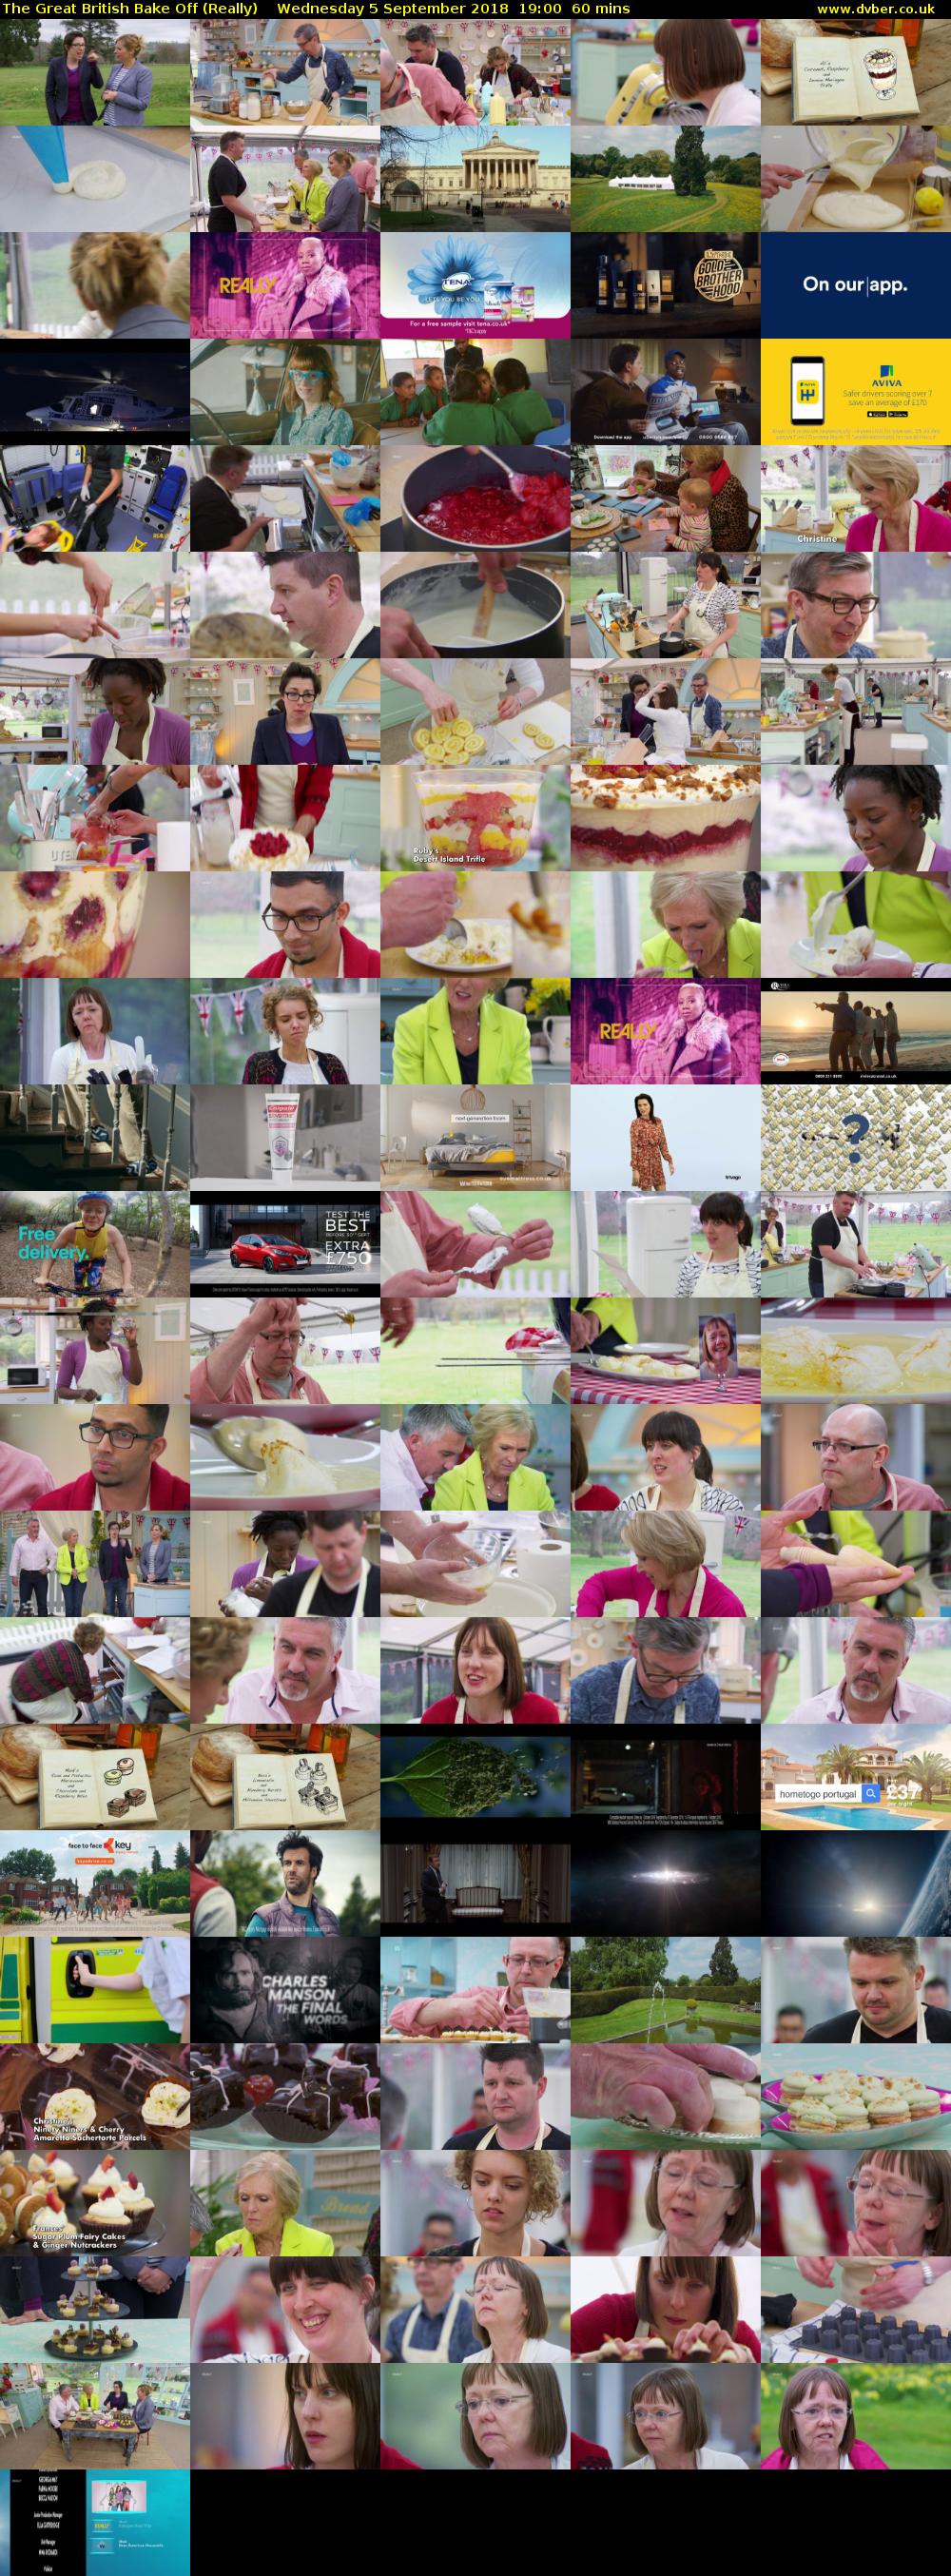 The Great British Bake Off (Really) Wednesday 5 September 2018 19:00 - 20:00